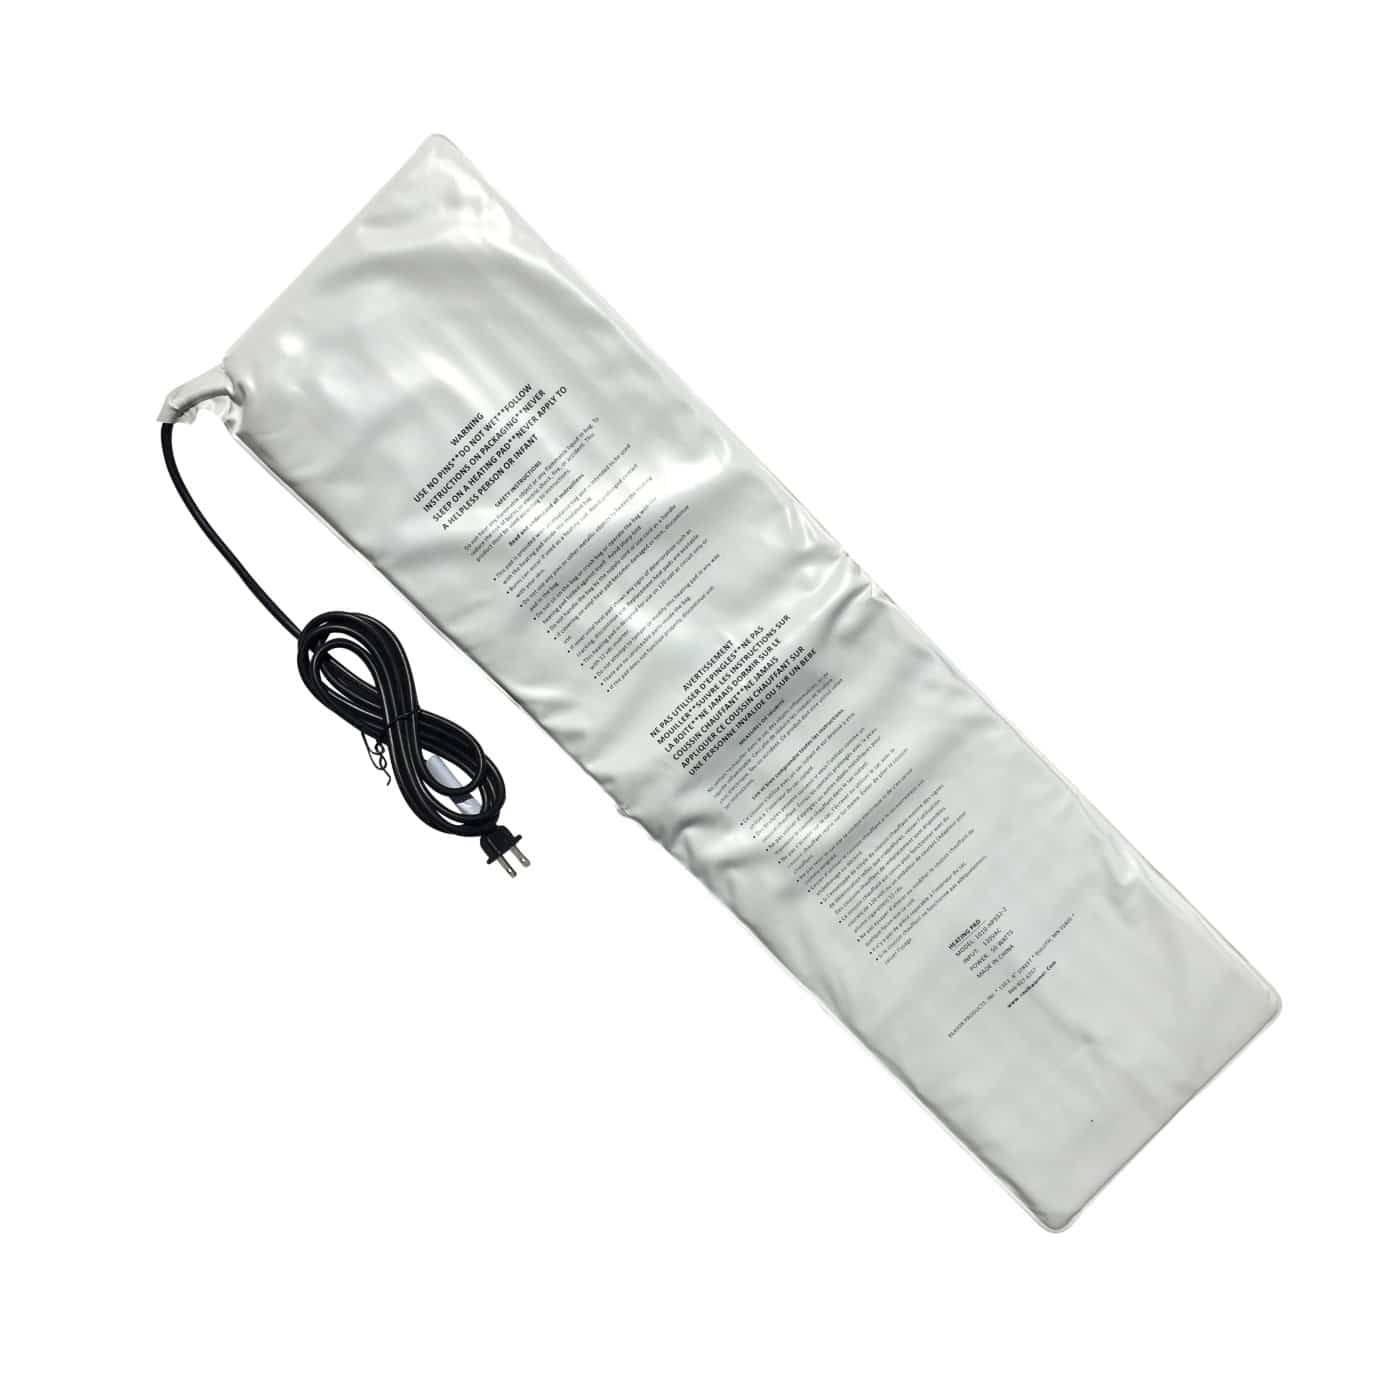 Replacement Heating Element for 0609 12 Tube Green Bag Warming Bag - Pad  1010-HP1215